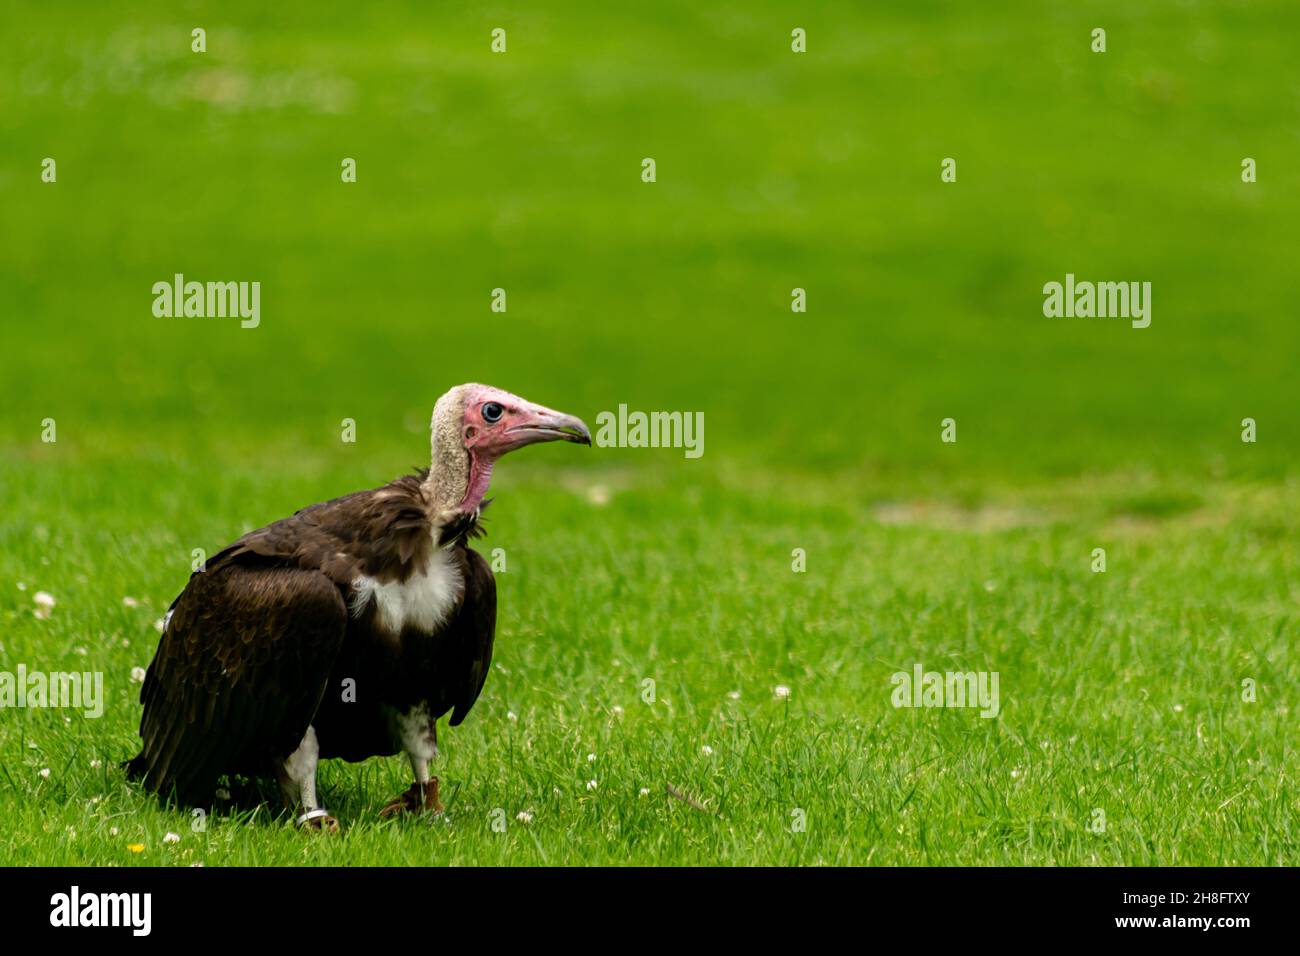 Hooded vulture bird sitting on a grass looking to the side, profile view of a bird of prey on the ground, vulture held captive and trained to obey Stock Photo